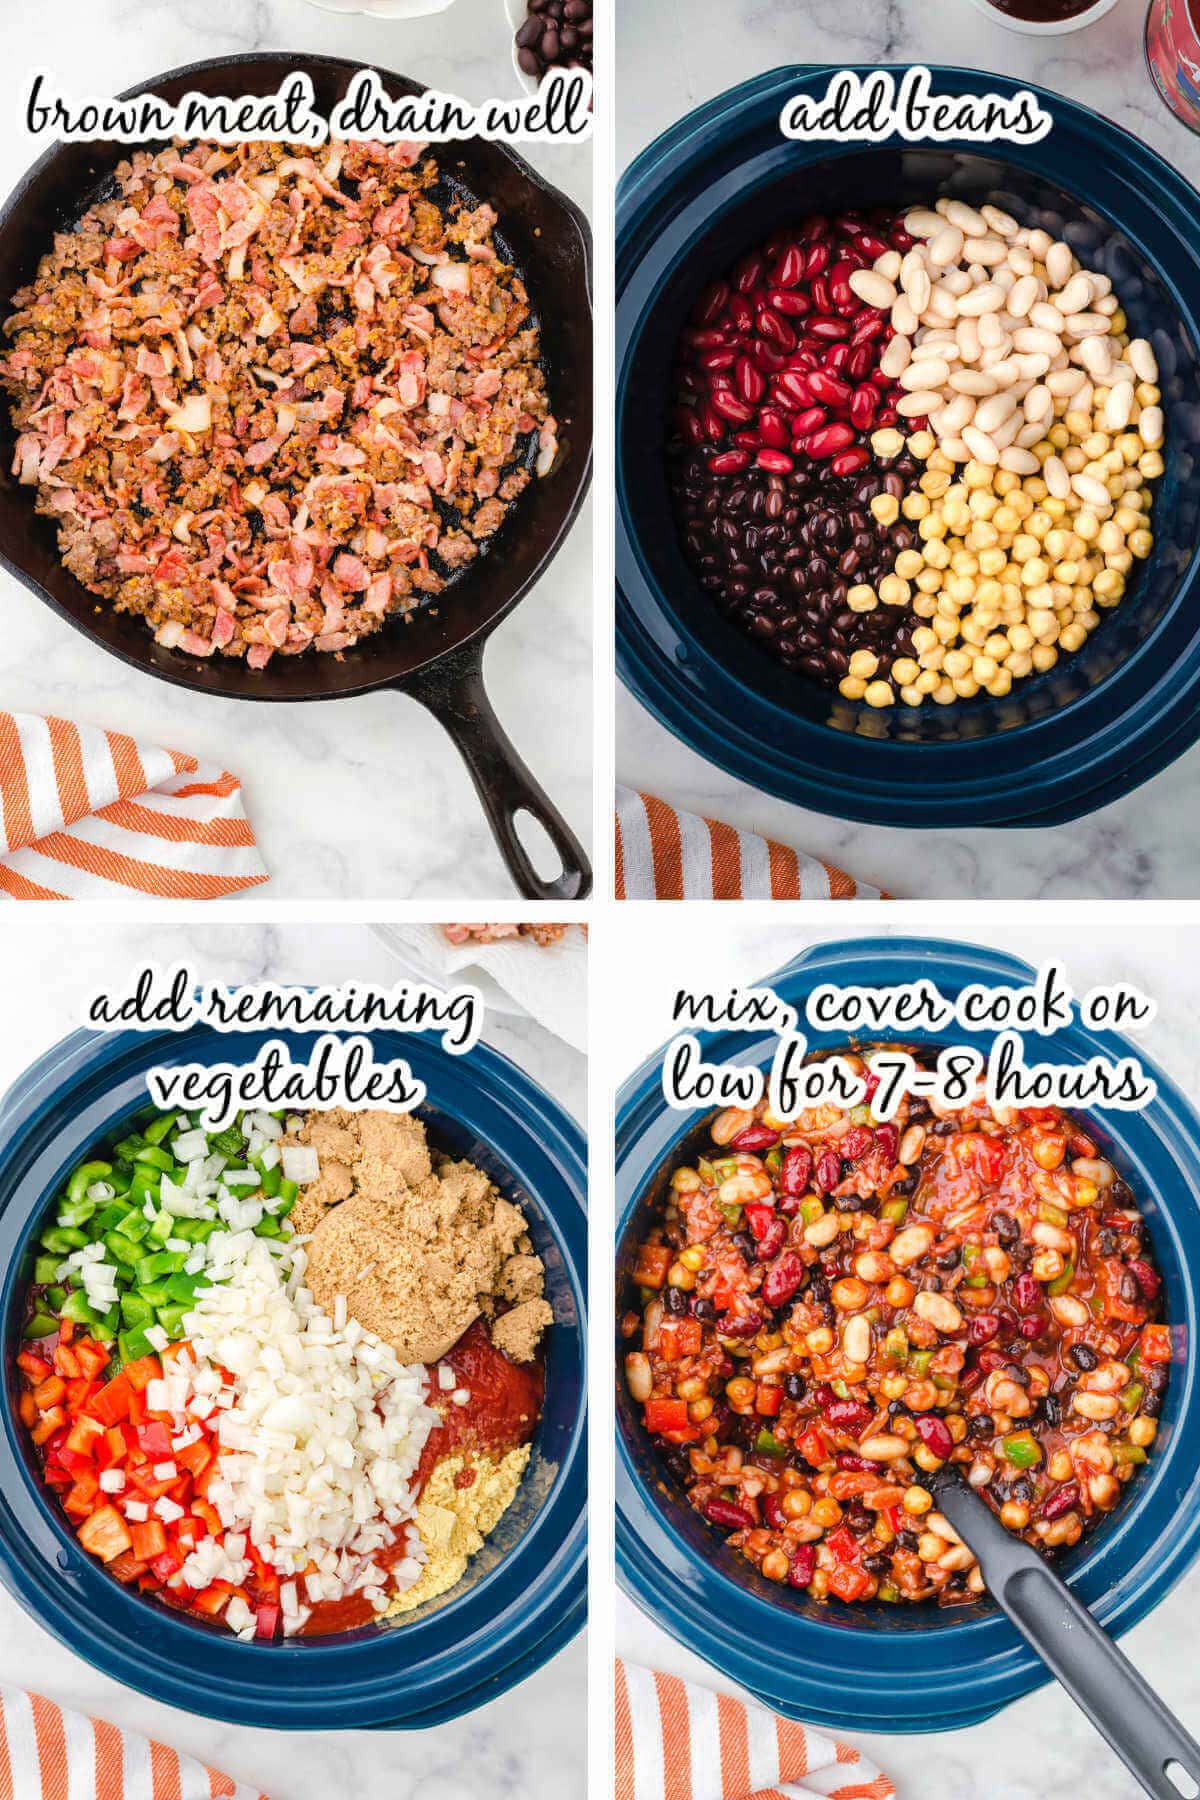 Step by step instructions to make Boston baked beans recipe.